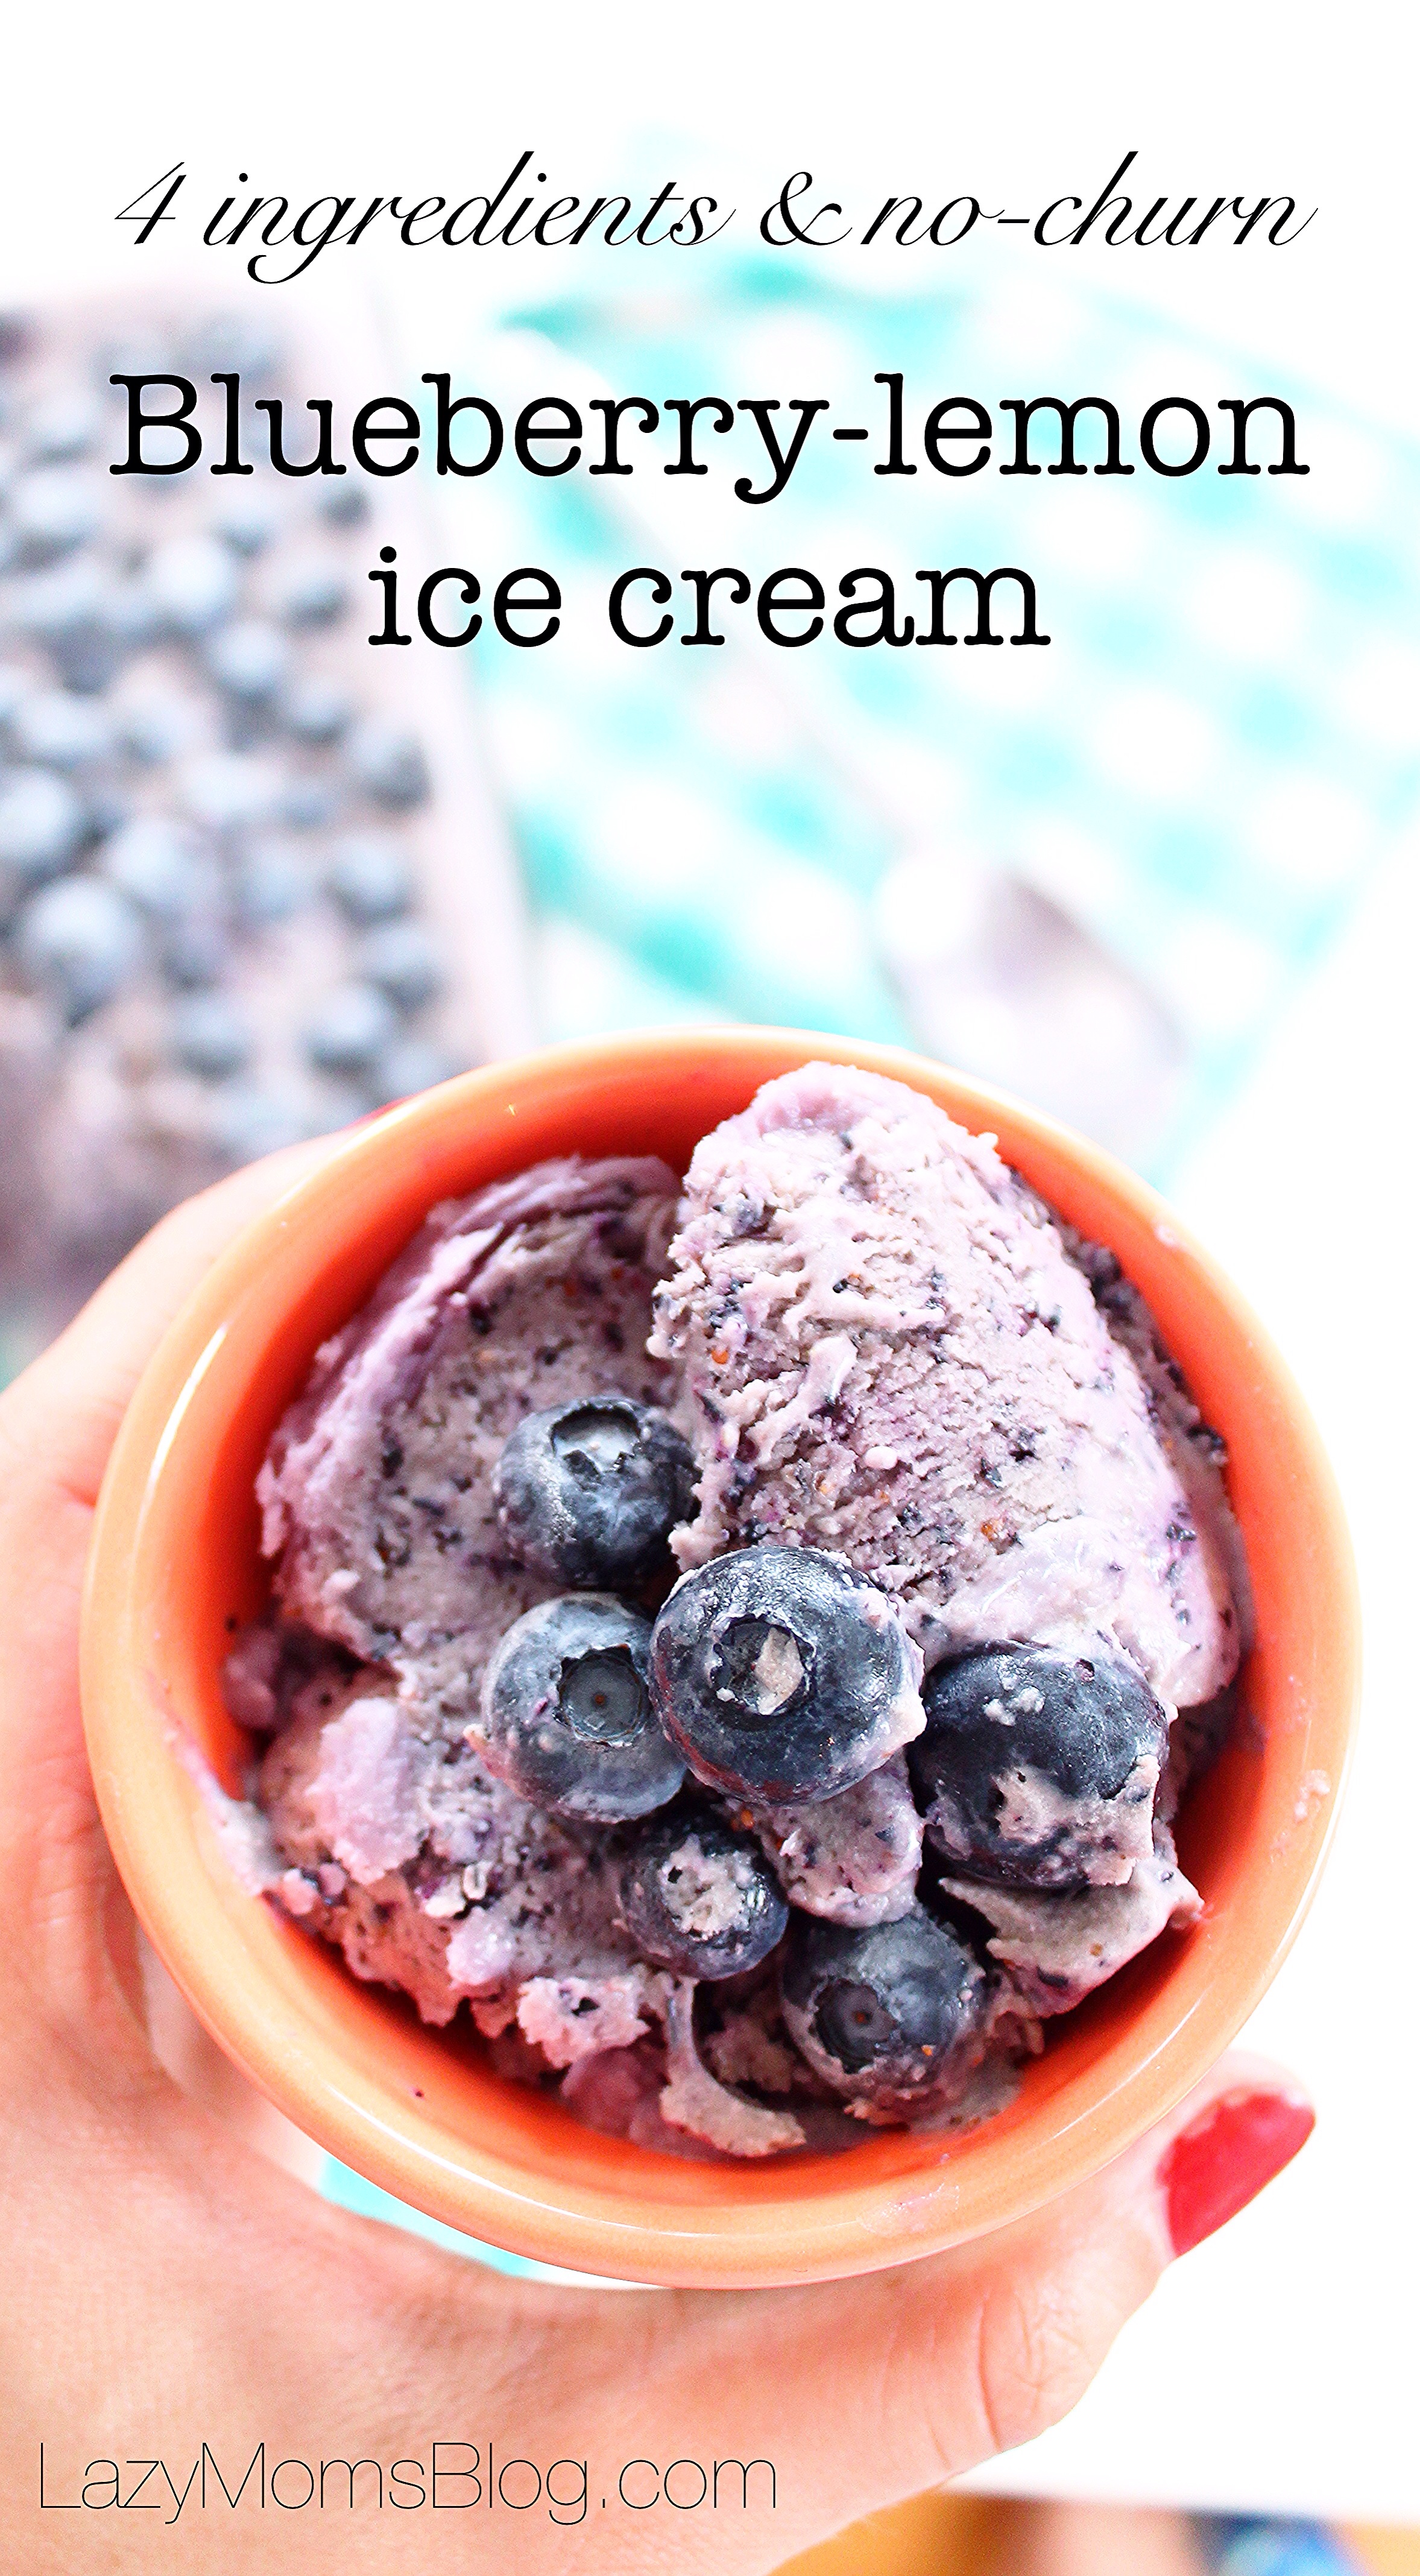 This no-churn recipe is simply amazing! So easy and so good, you simply won't buy ice cream again! #nochurn #icecream  